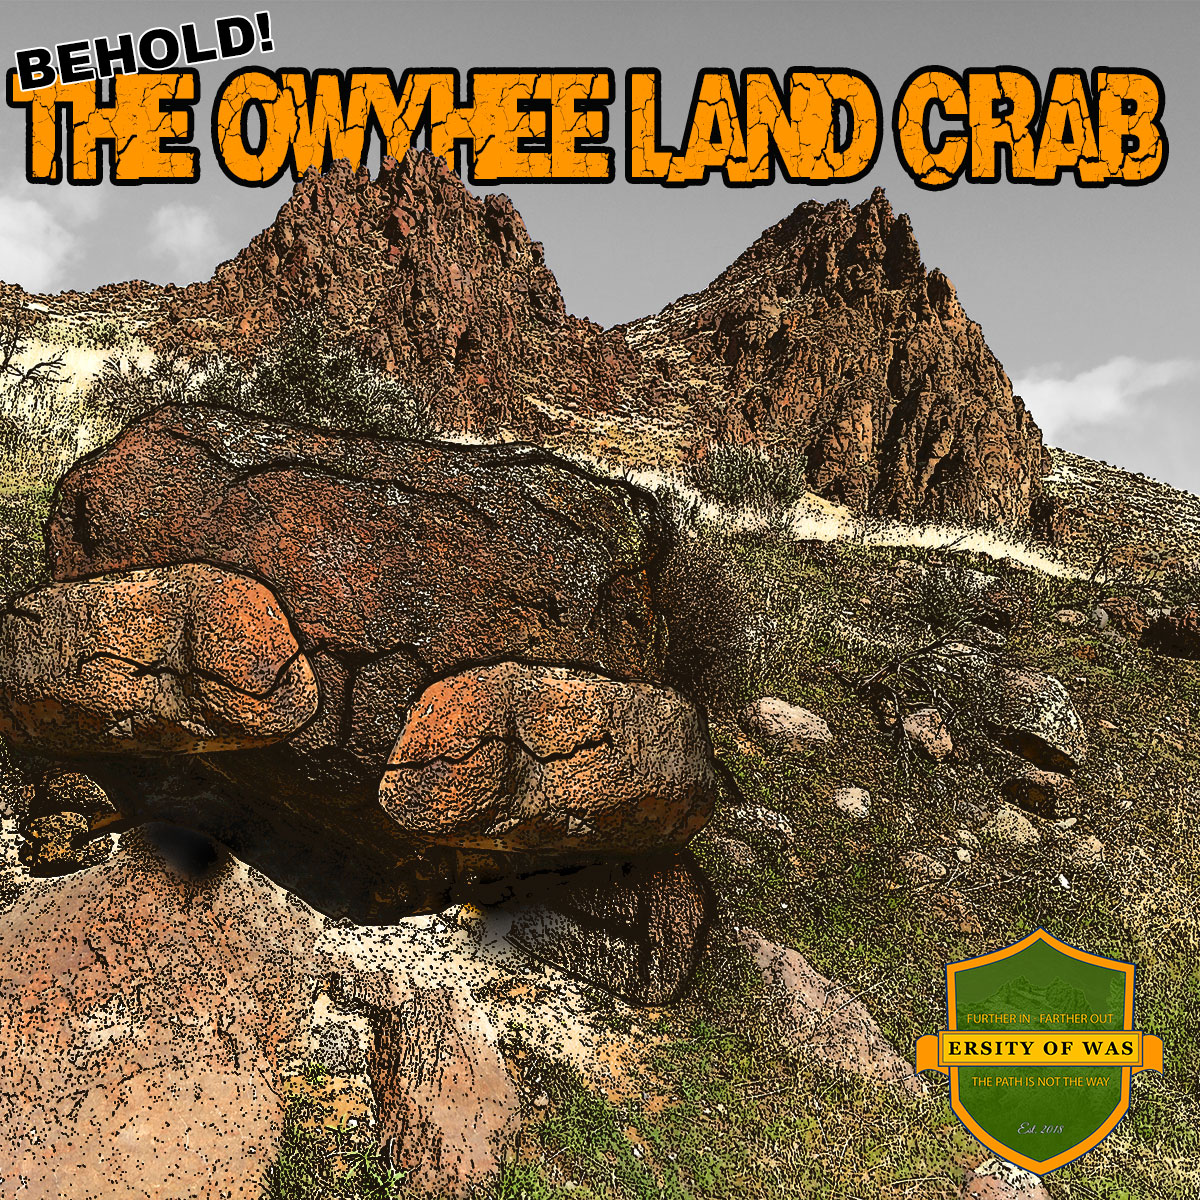 You are currently viewing Campus Legends: The Owyhee Land Crab